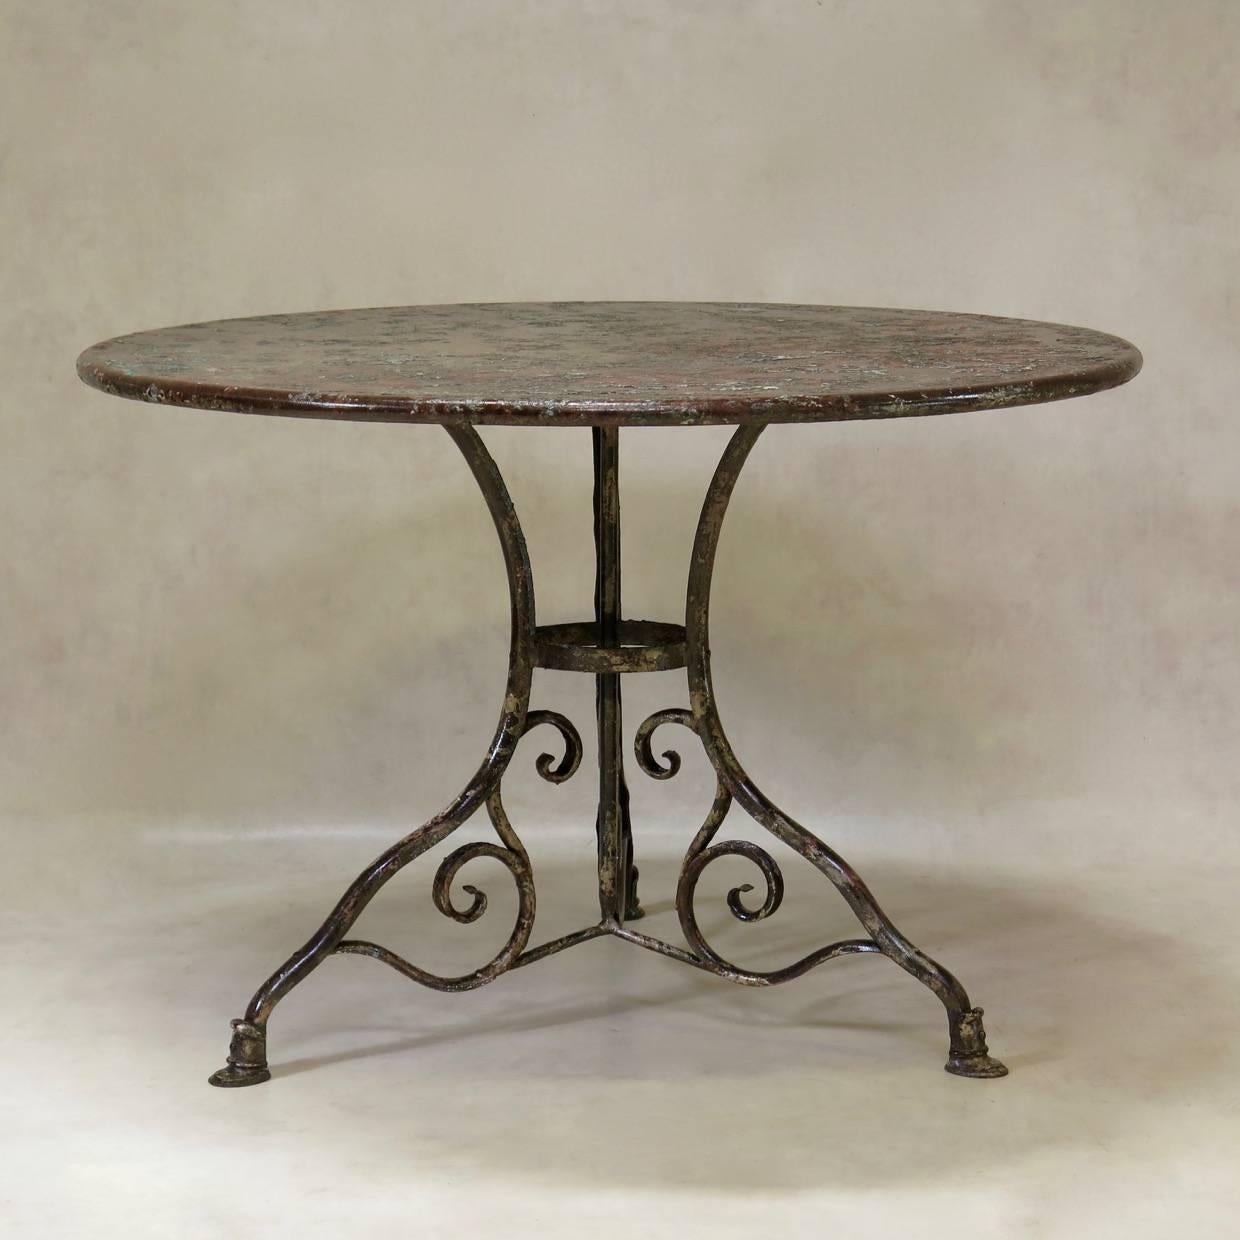 Rare and elegant round outdoor dining table raised on a very pretty tripod base, ending in sabots. The table is made of solid, heavy wrought iron and possesses an unusual palimpsest of muted colours (the dark grey of the iron, as well as dark green